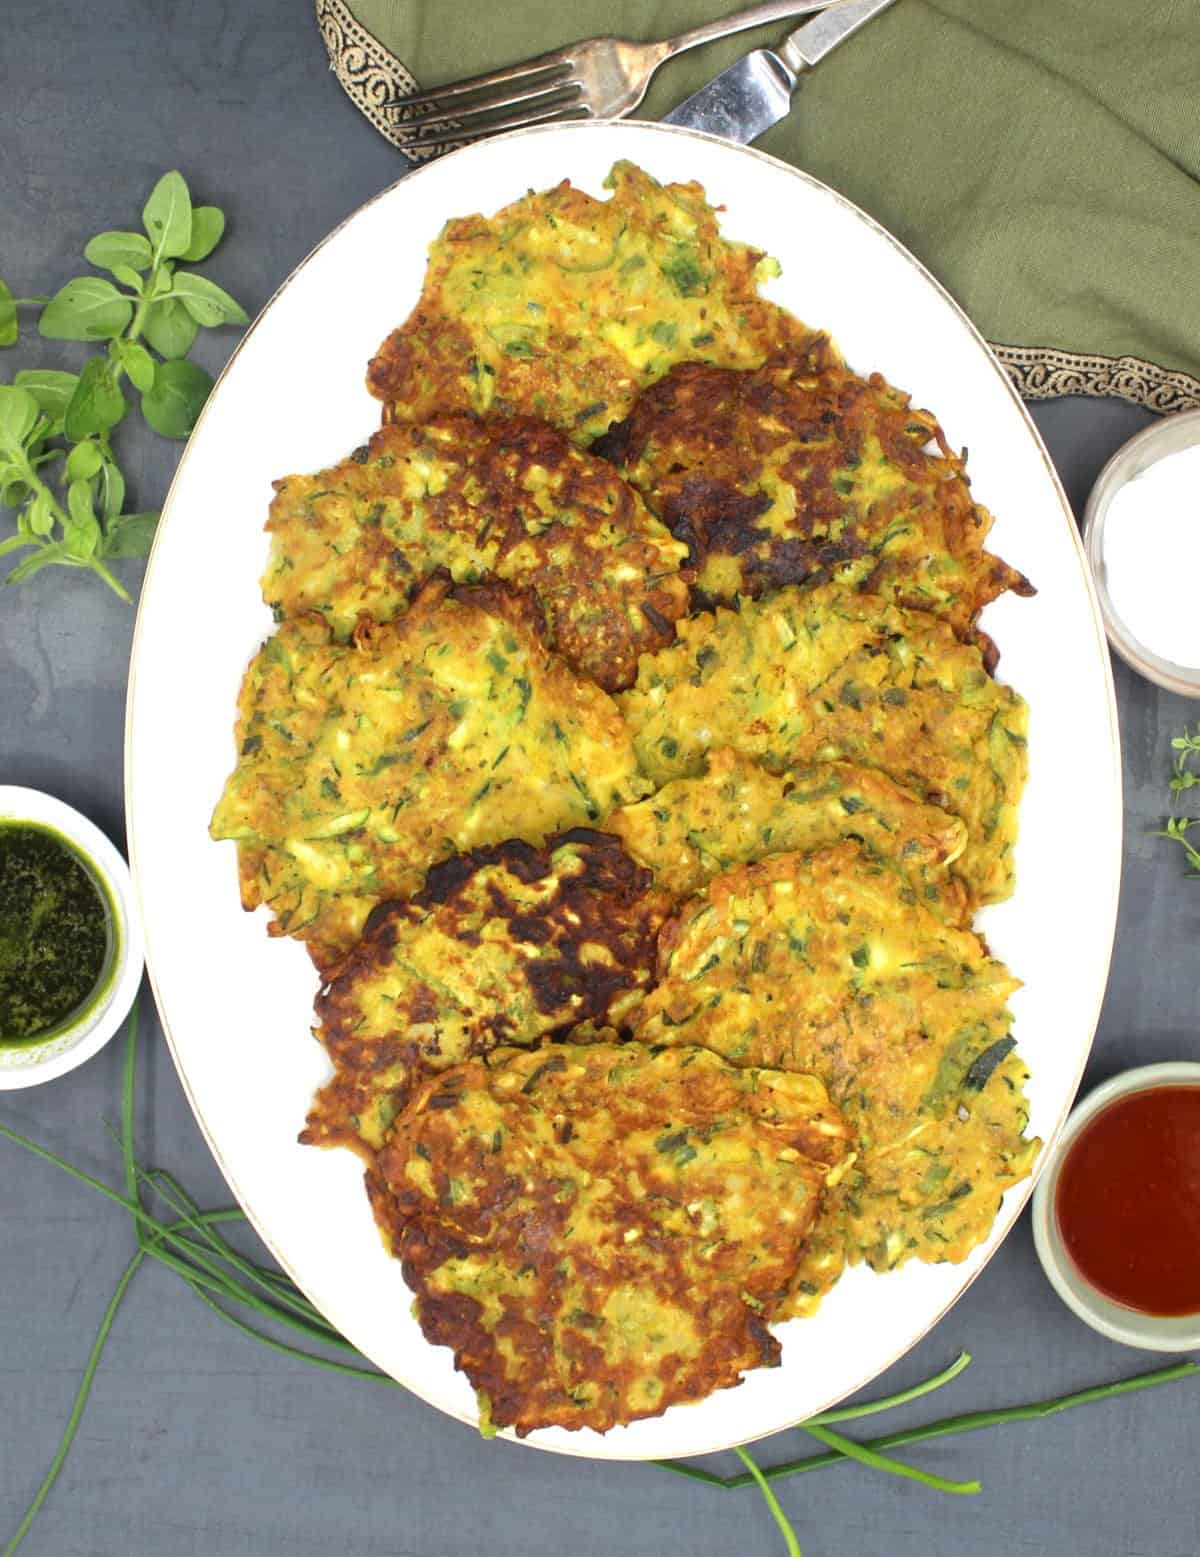 Vegan zucchini fritters on oval white platter surrounded by vegan sauces and herbs and a knife and fork.